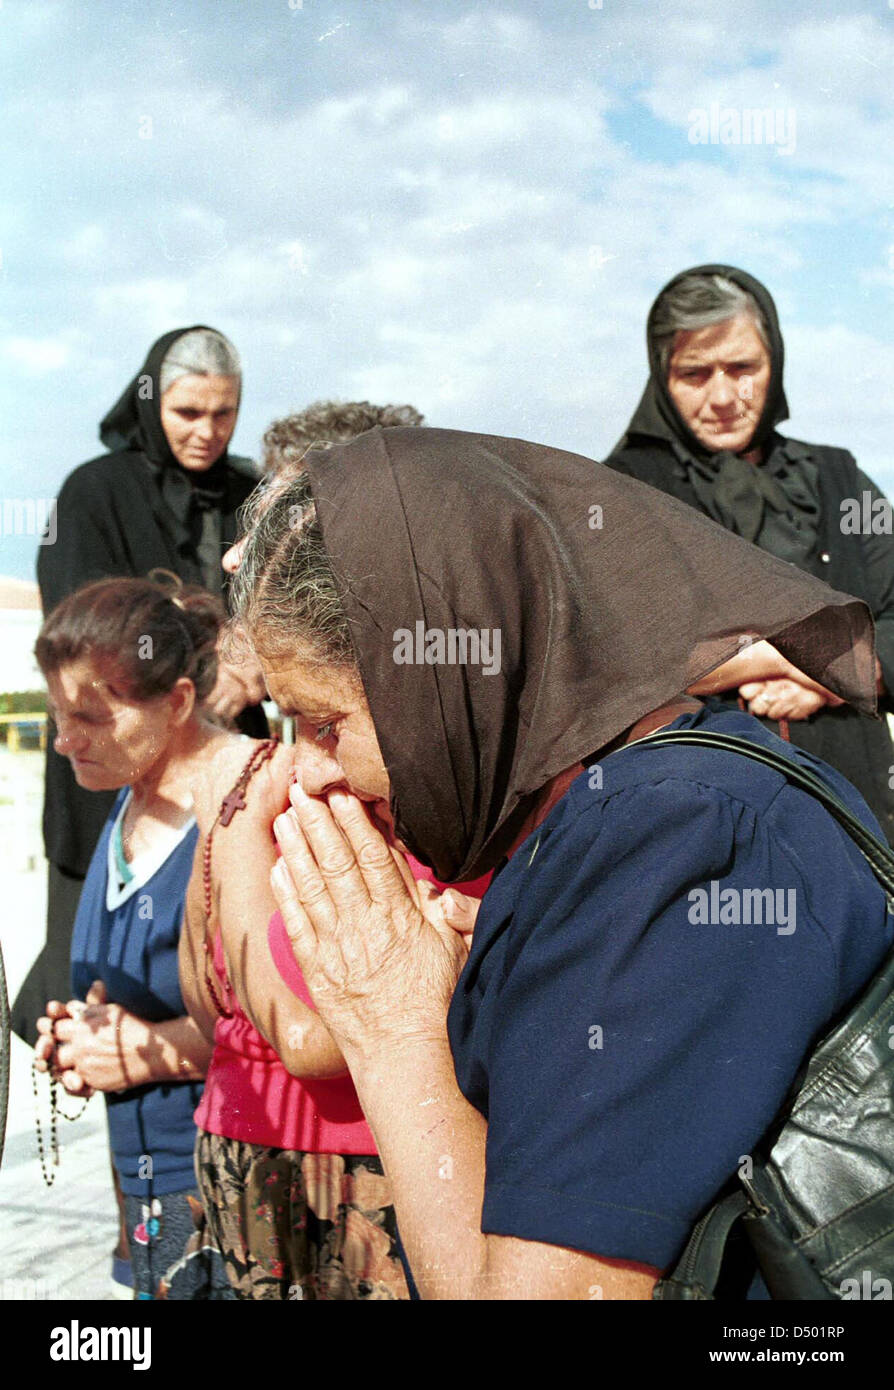 MEDJUGORIA, BOSNIA, 22 AUGUST 1993 --- Catholic pilgrims pray at a shrine to the Virgin Mary in the town of Medjugoria. Thousands of religious pilgrims annually make the trek to Medjugoria, where two teenage girls claim the Virgin Mary once appeared to them. Stock Photo